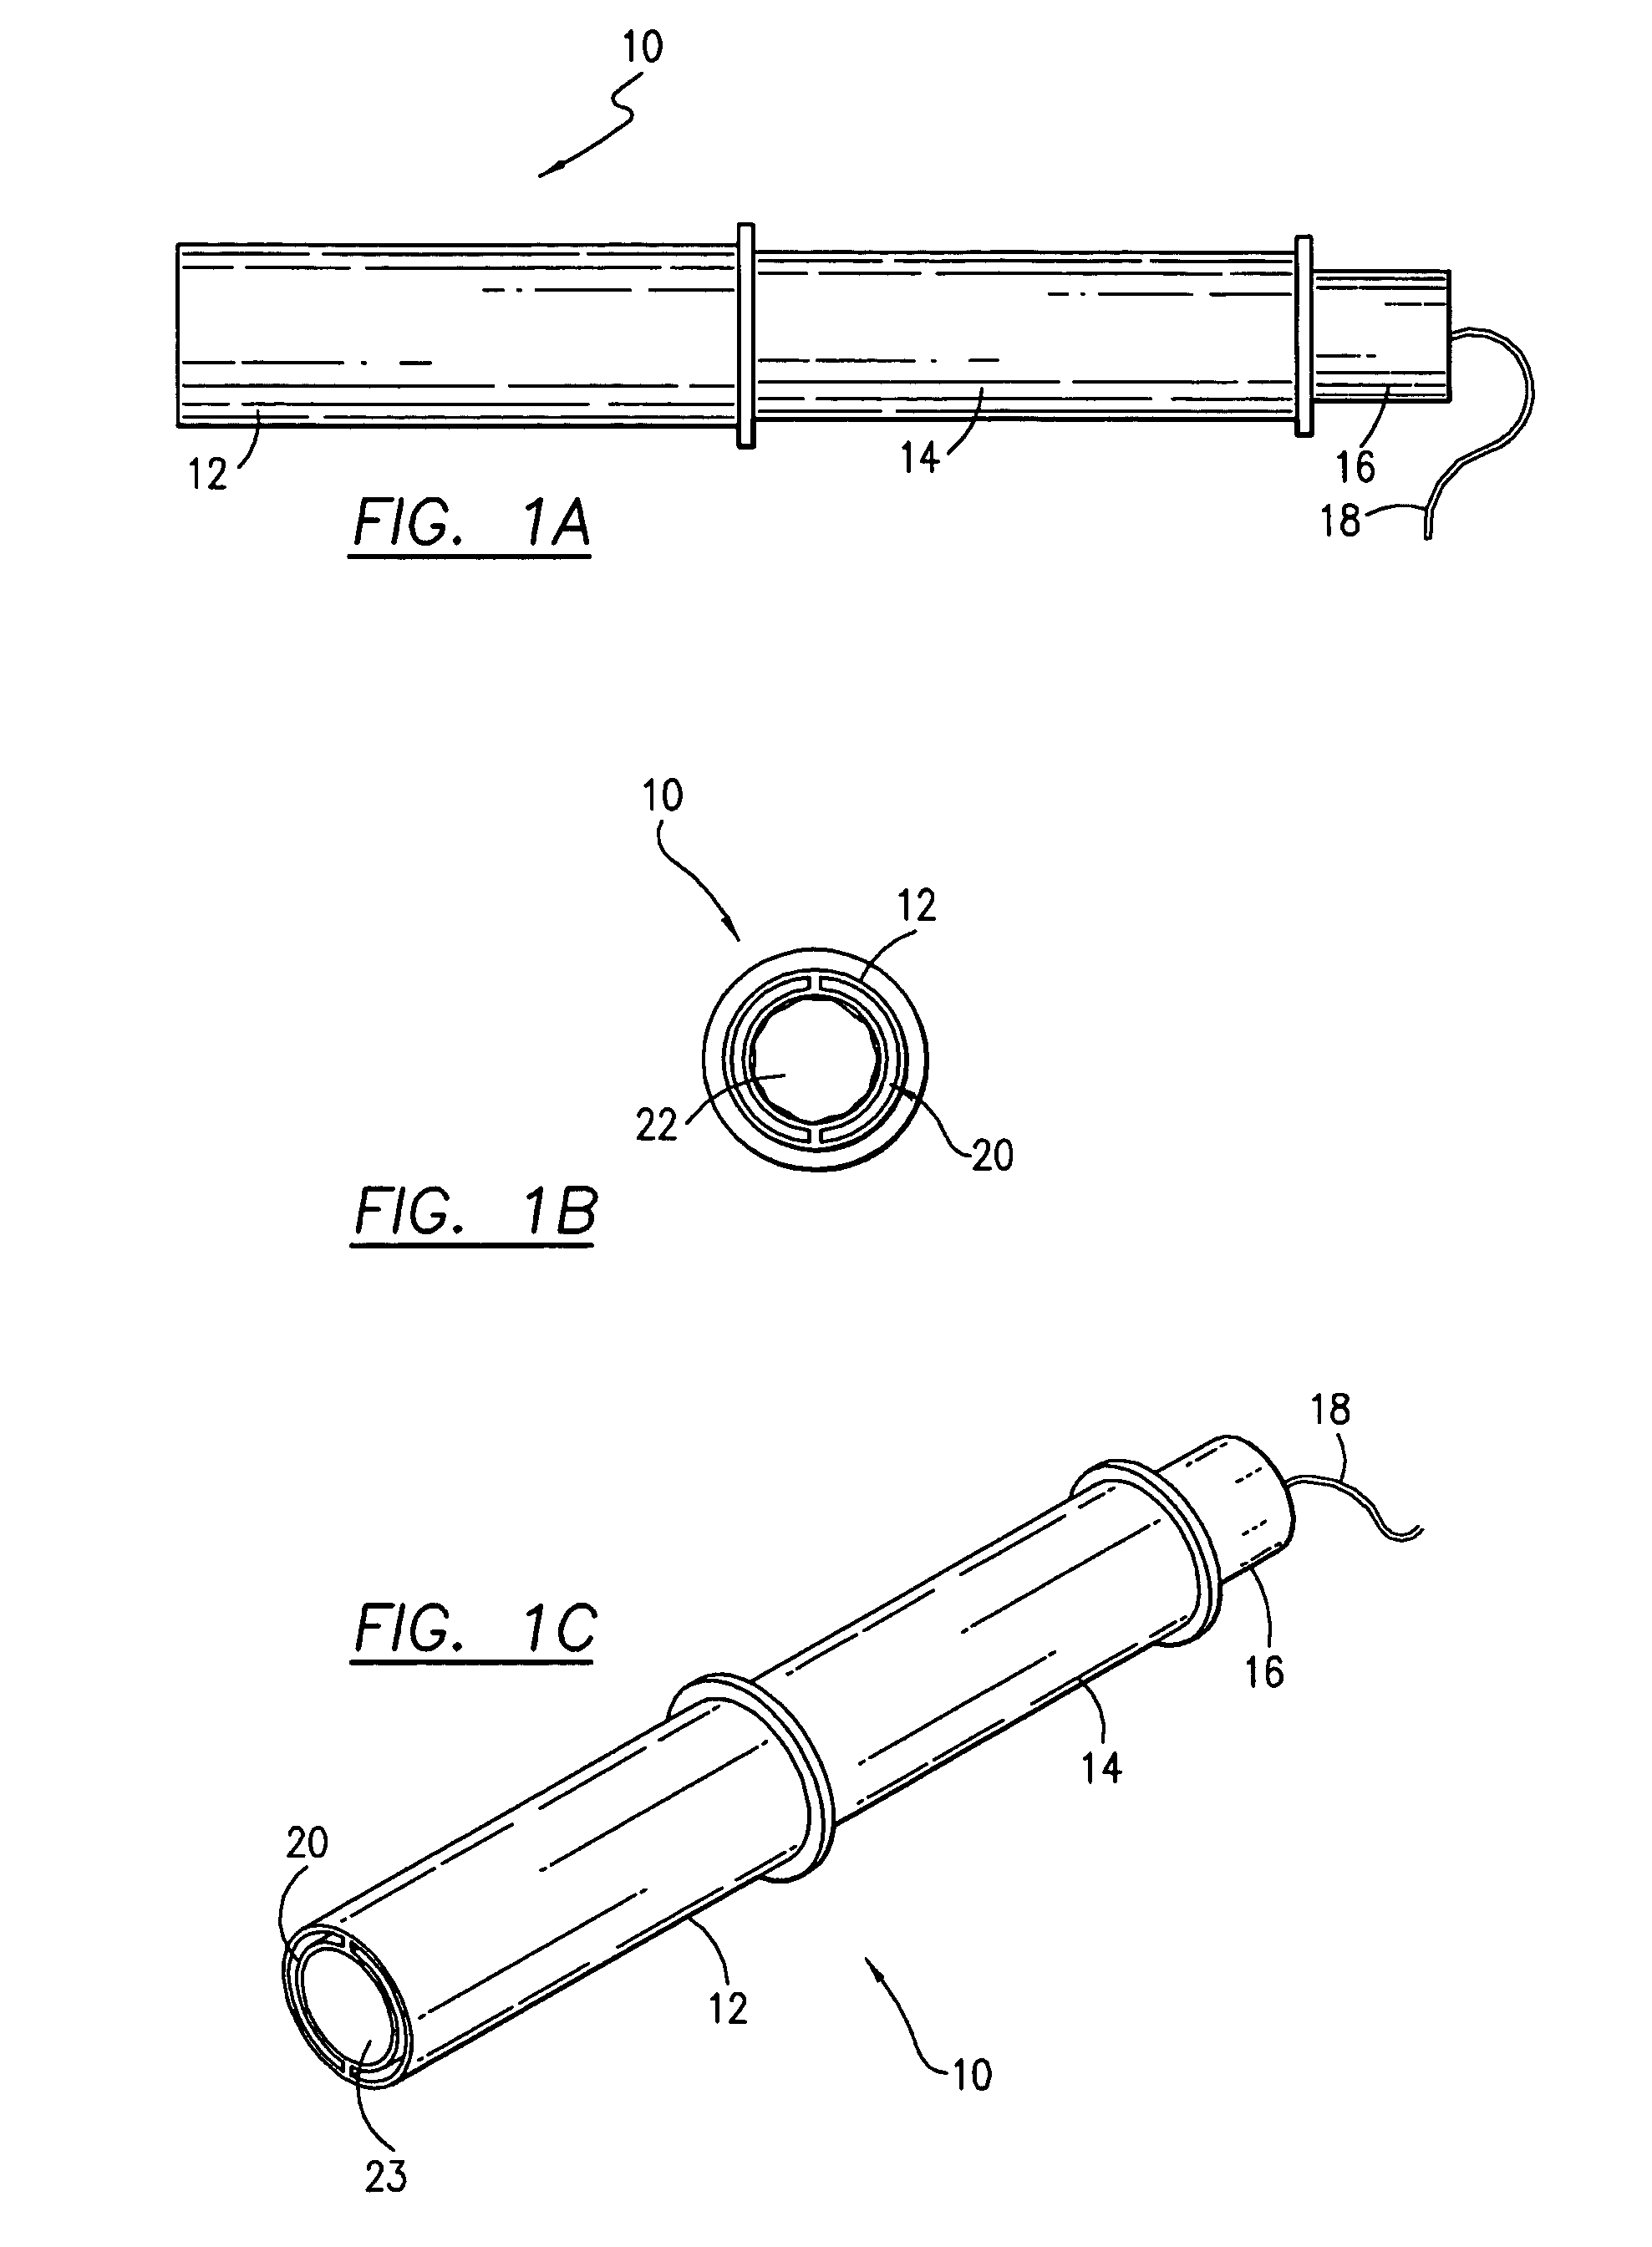 Apparatus and method for the treatment of dysmenorrhea